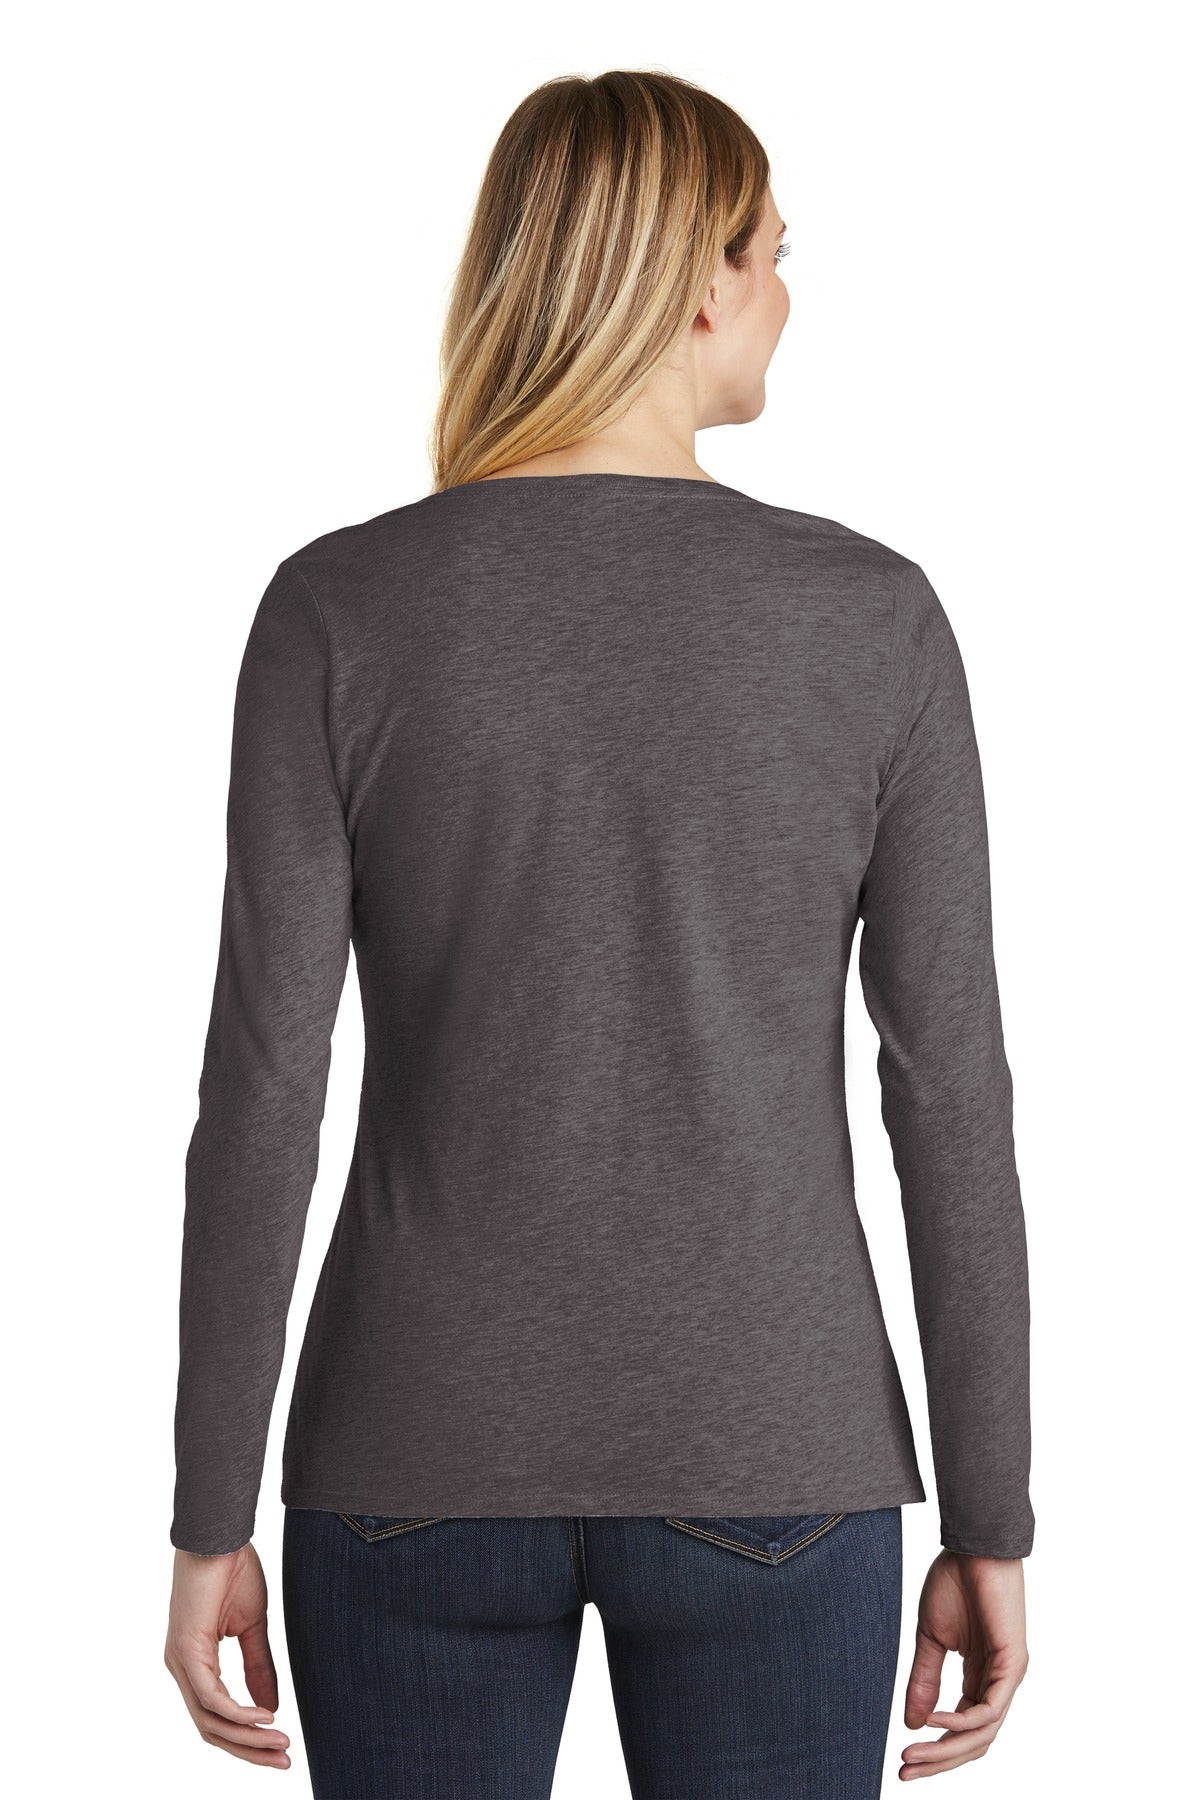 District Women's Very Important Tee Long Sleeve V-Neck. DT6201